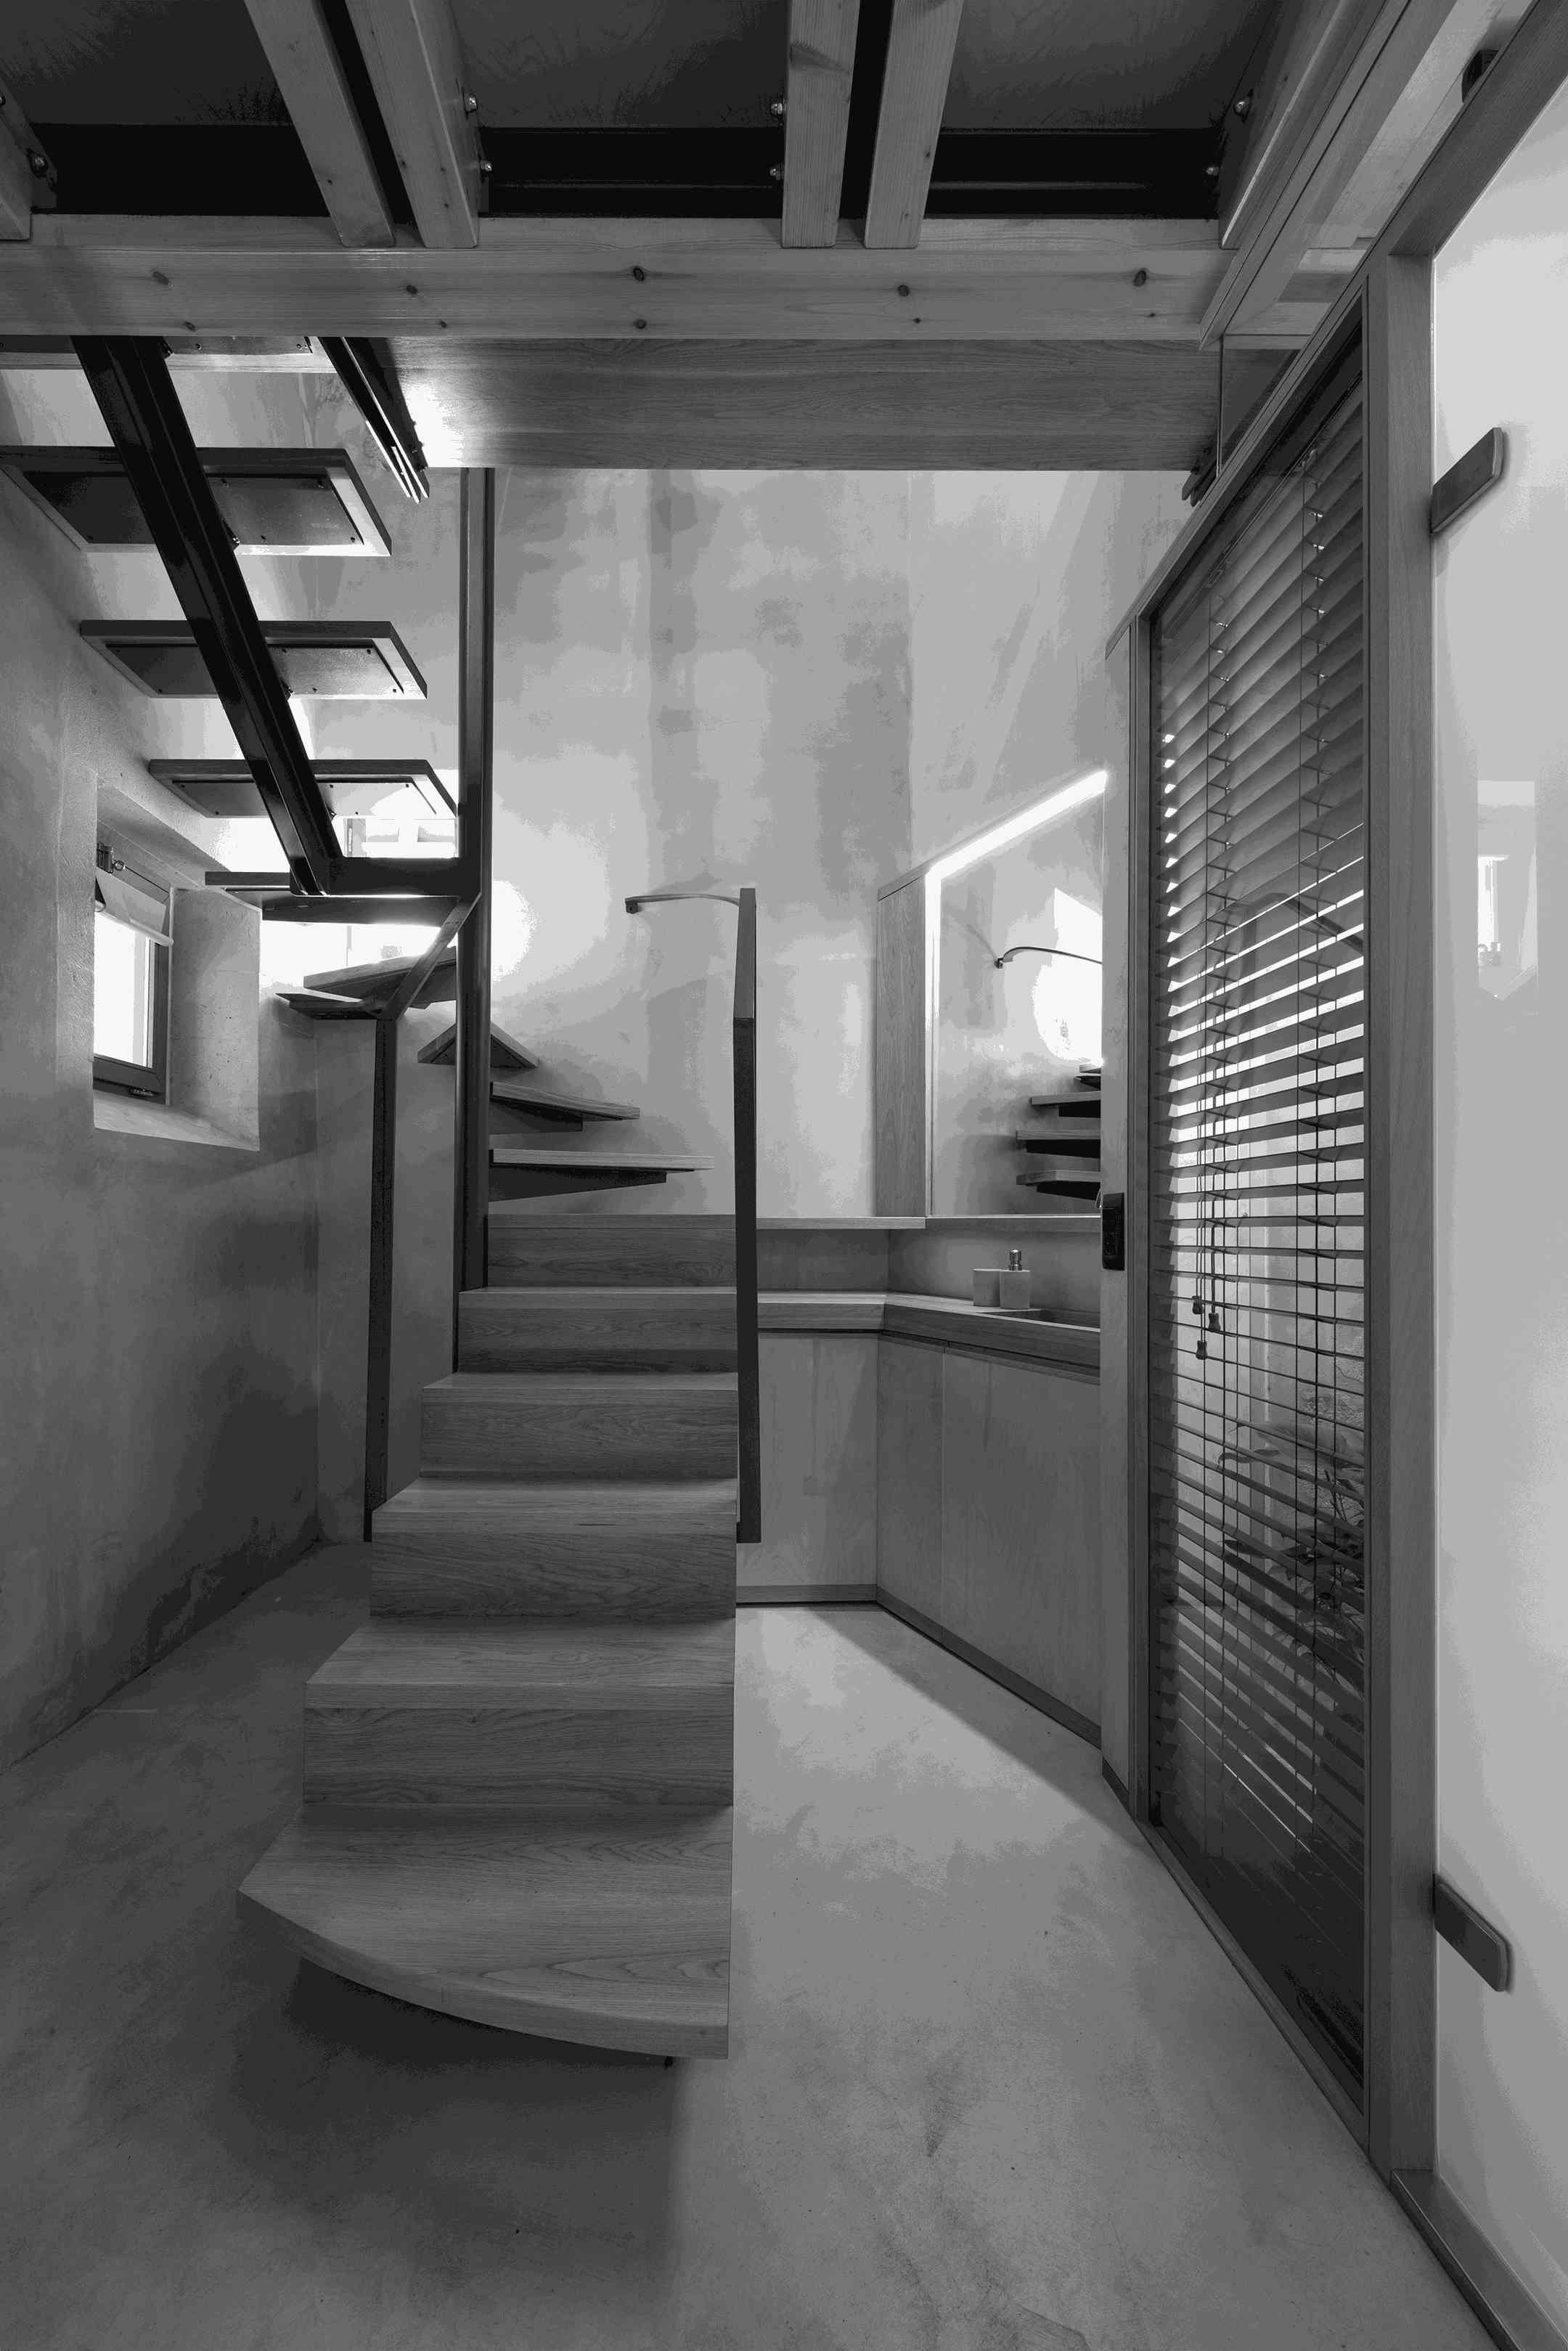 Rehabilitation of a Small Three Storey House in the Old Town of Chania, Crete by I.K. Verikakis Architectural Office No1